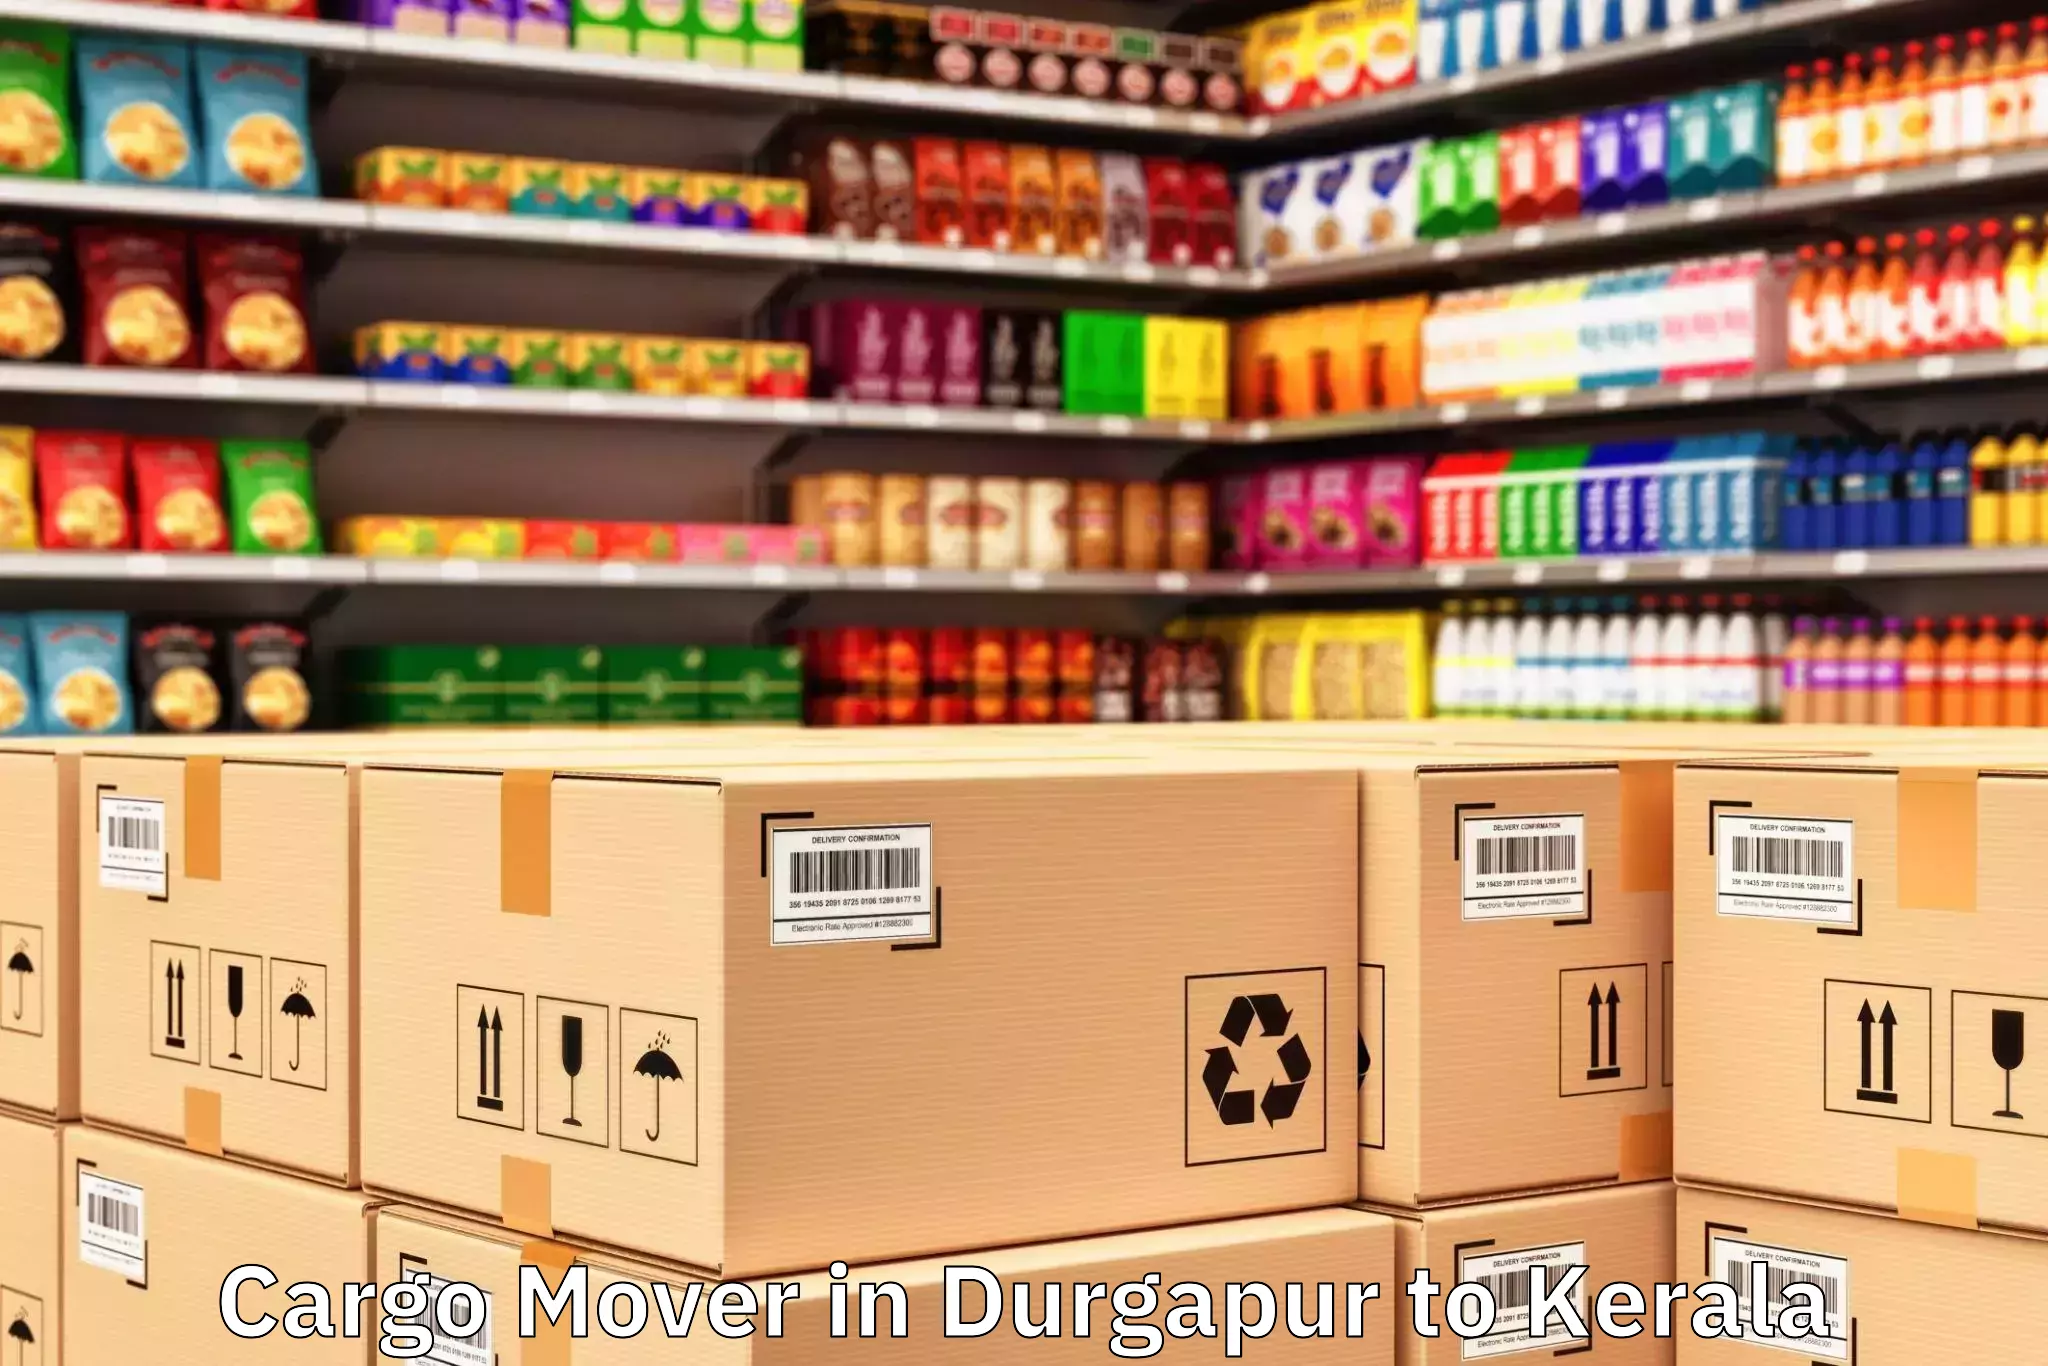 Easy Durgapur to Angamali Cargo Mover Booking